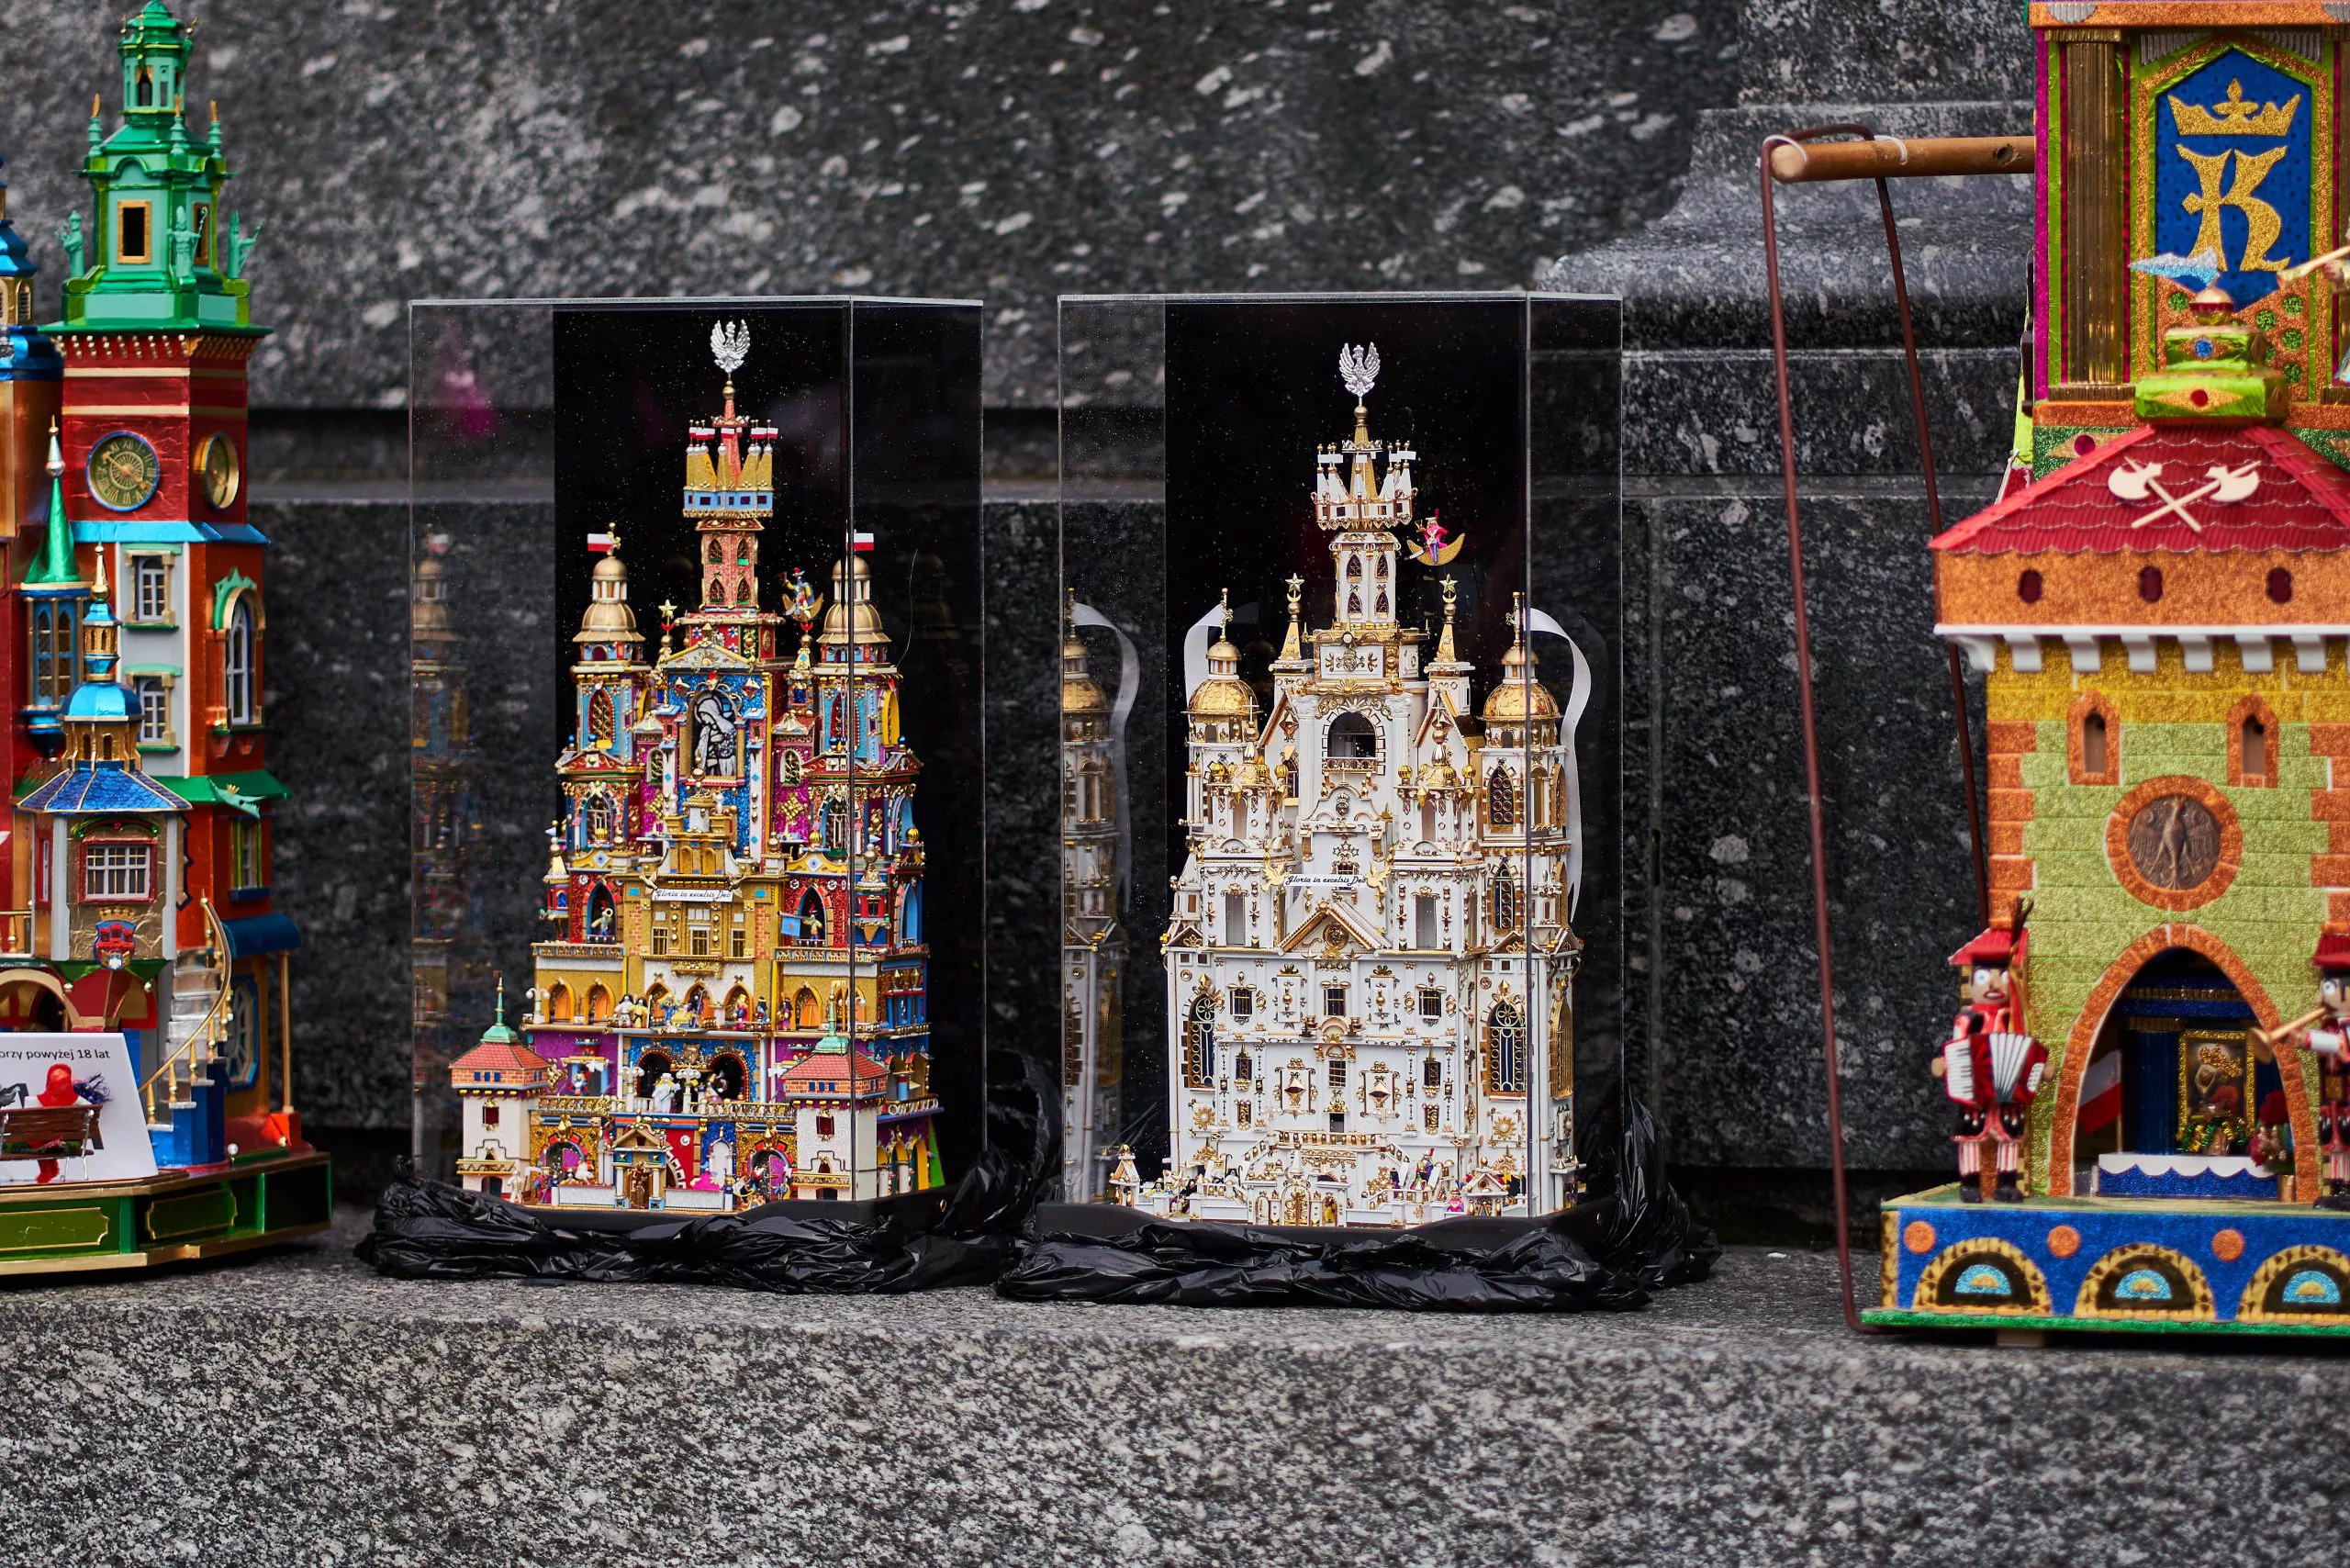 Four miniature architectonic constructions composed of various elements of Kraków architecture with centrally placed miniature scenes presenting nativity of Jesus, all rich in detail and covered in extremely colourful tinfoil, stand on a dark stone ledge against the background of mottled black marble.